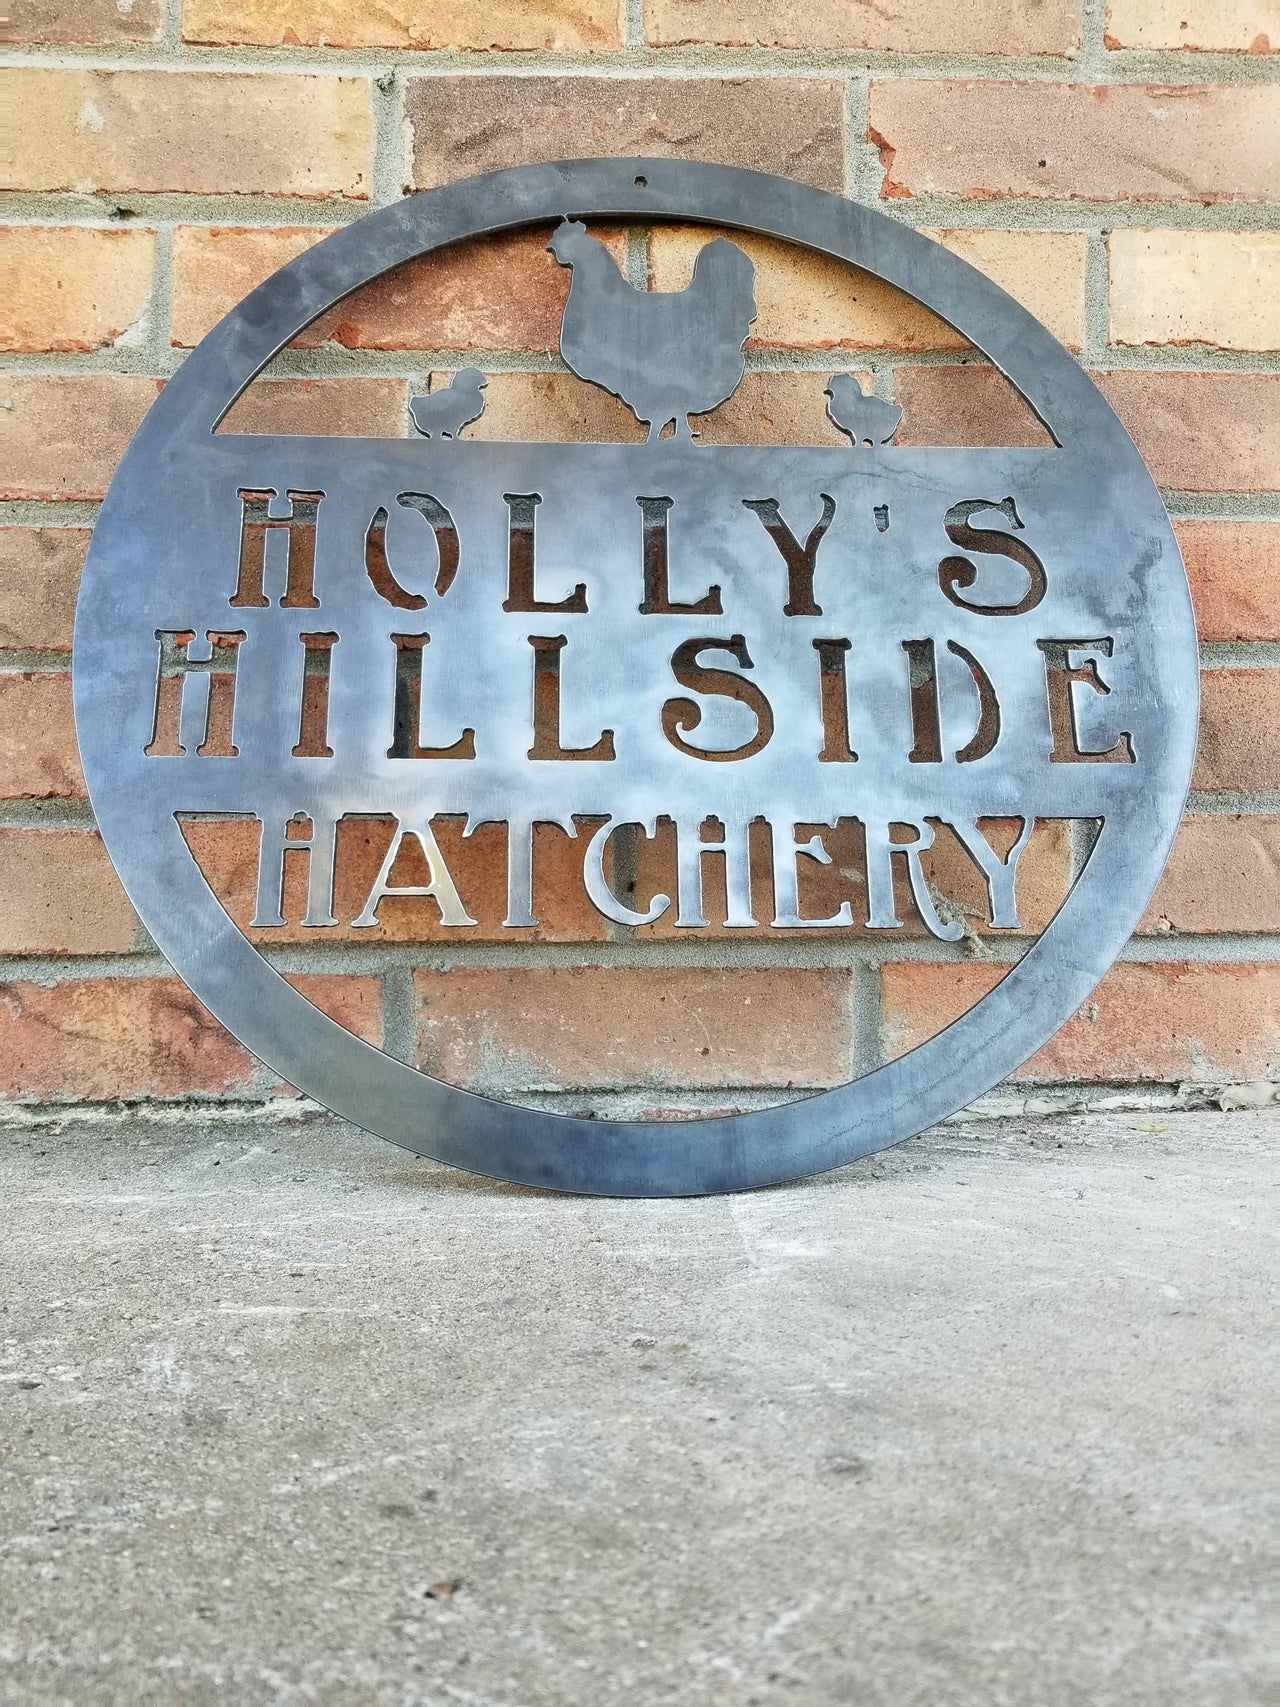 This metal sign is personalized and has the image of a chicken and two chicks at the top. The sign reads, "Holly's Hillside Hatchery".